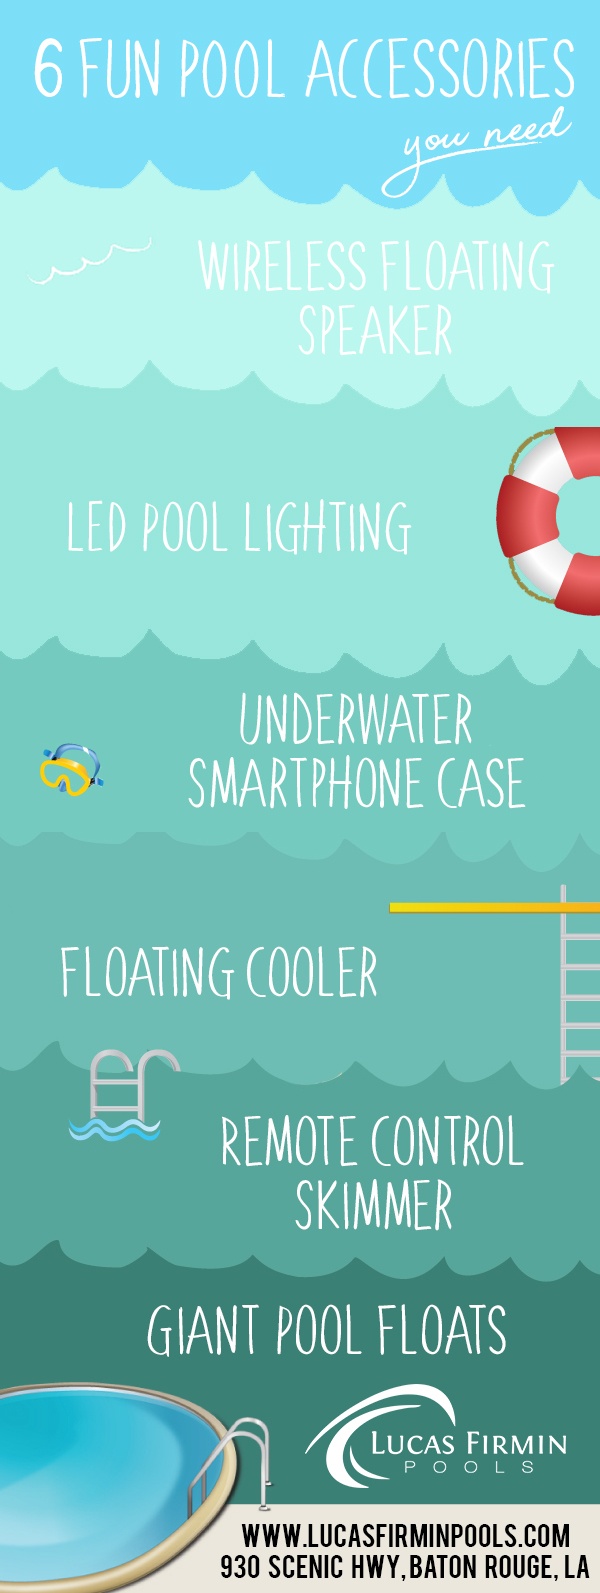 In-Ground Pool Builder in Baton Rouge: 6 Pool Accessories You Need